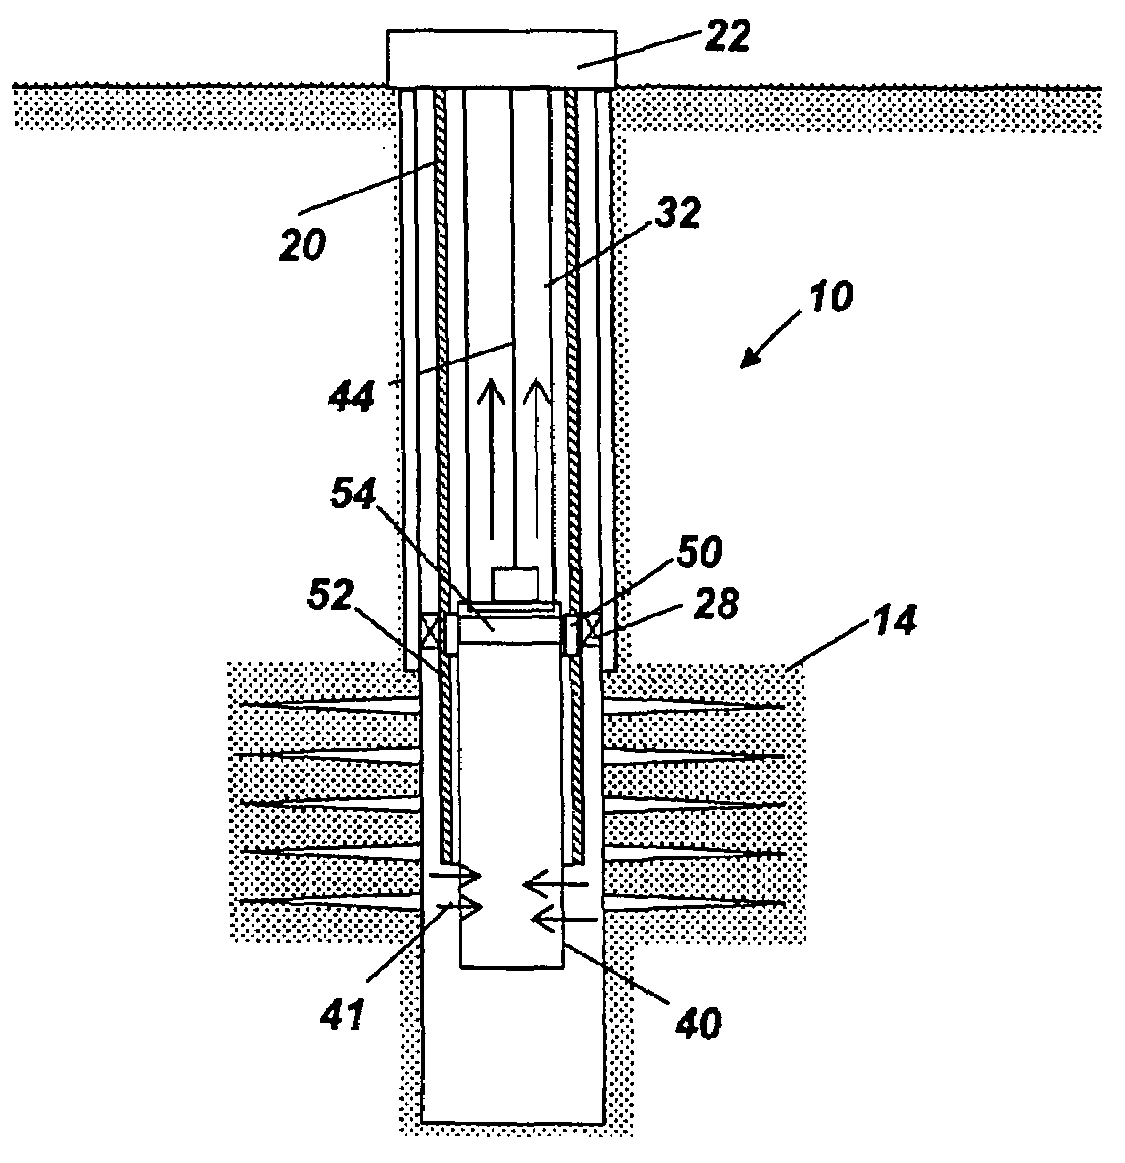 Wireline retrievable dsg/downhole pump system for cyclic steam and continuous steam flooding operations in petroleum reservoirs